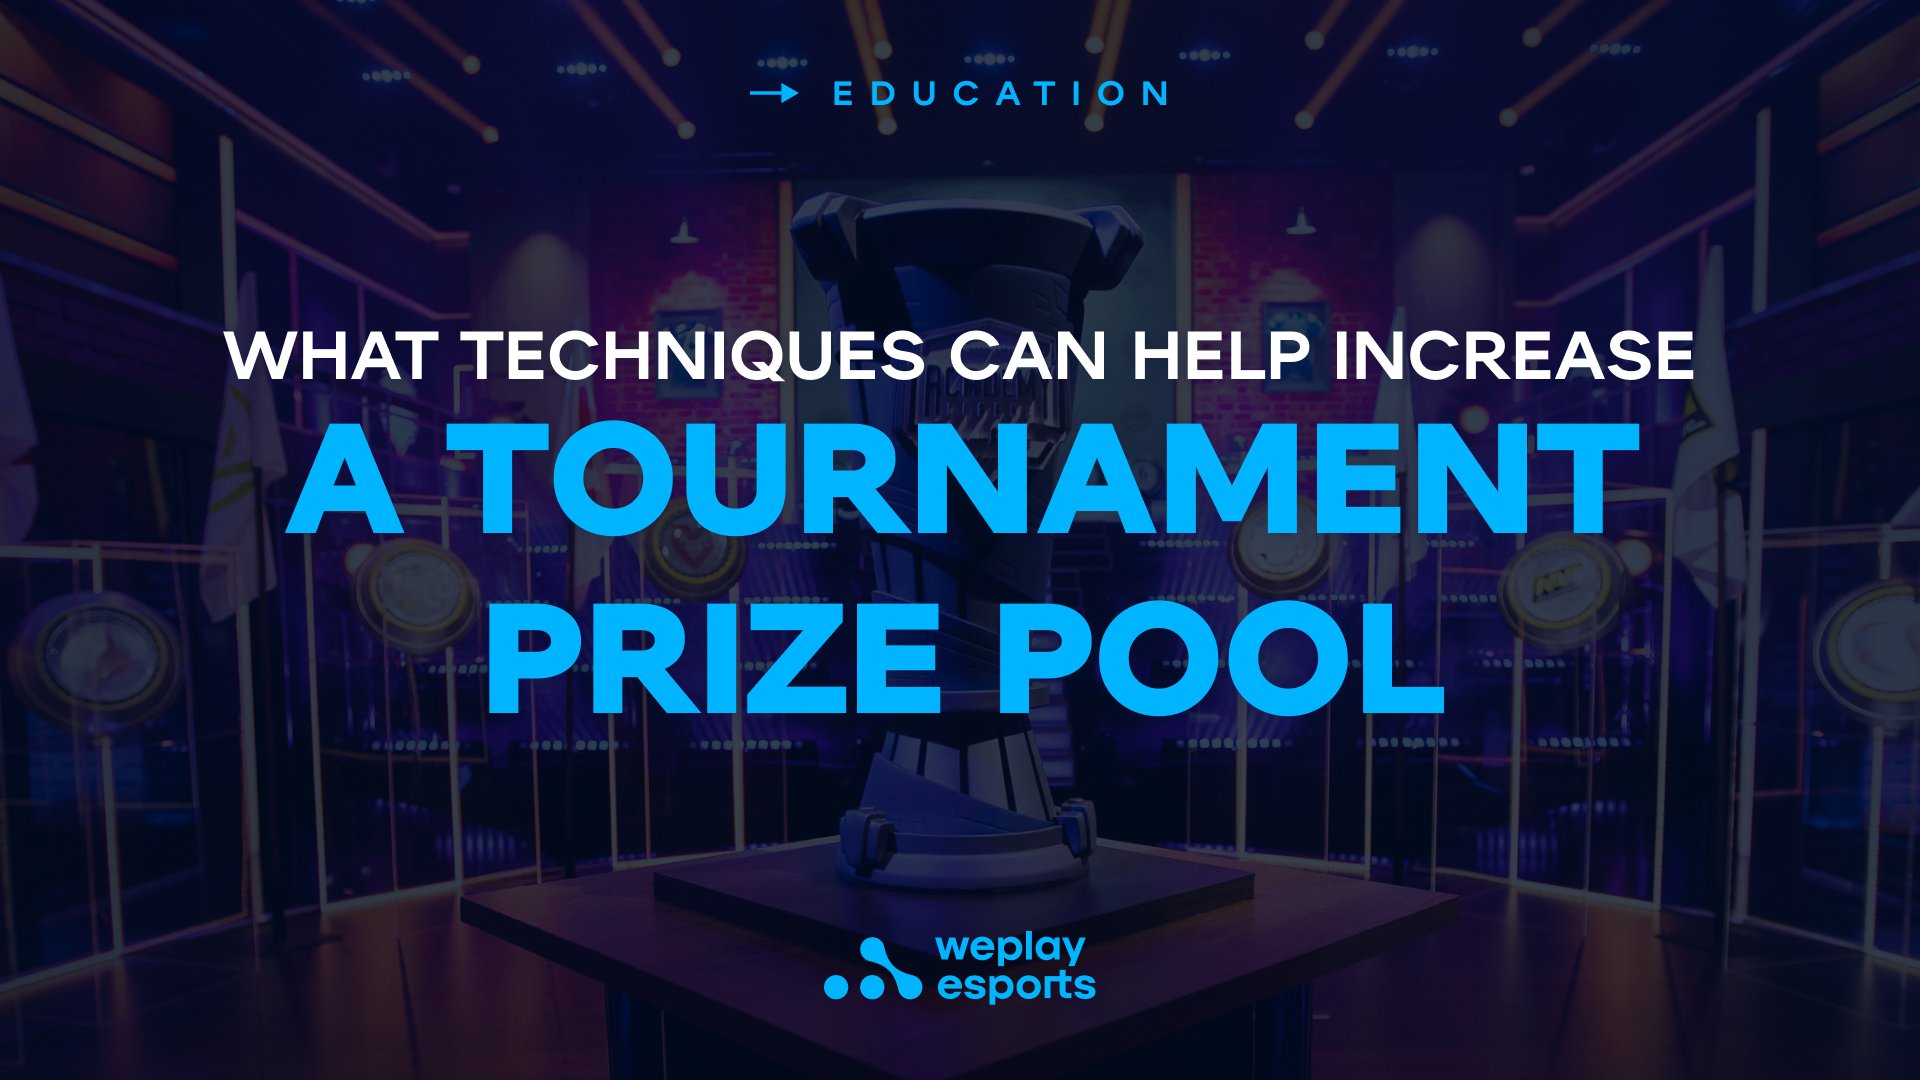 How to increase a prize pool using the right tools. Source: WePlay Holding